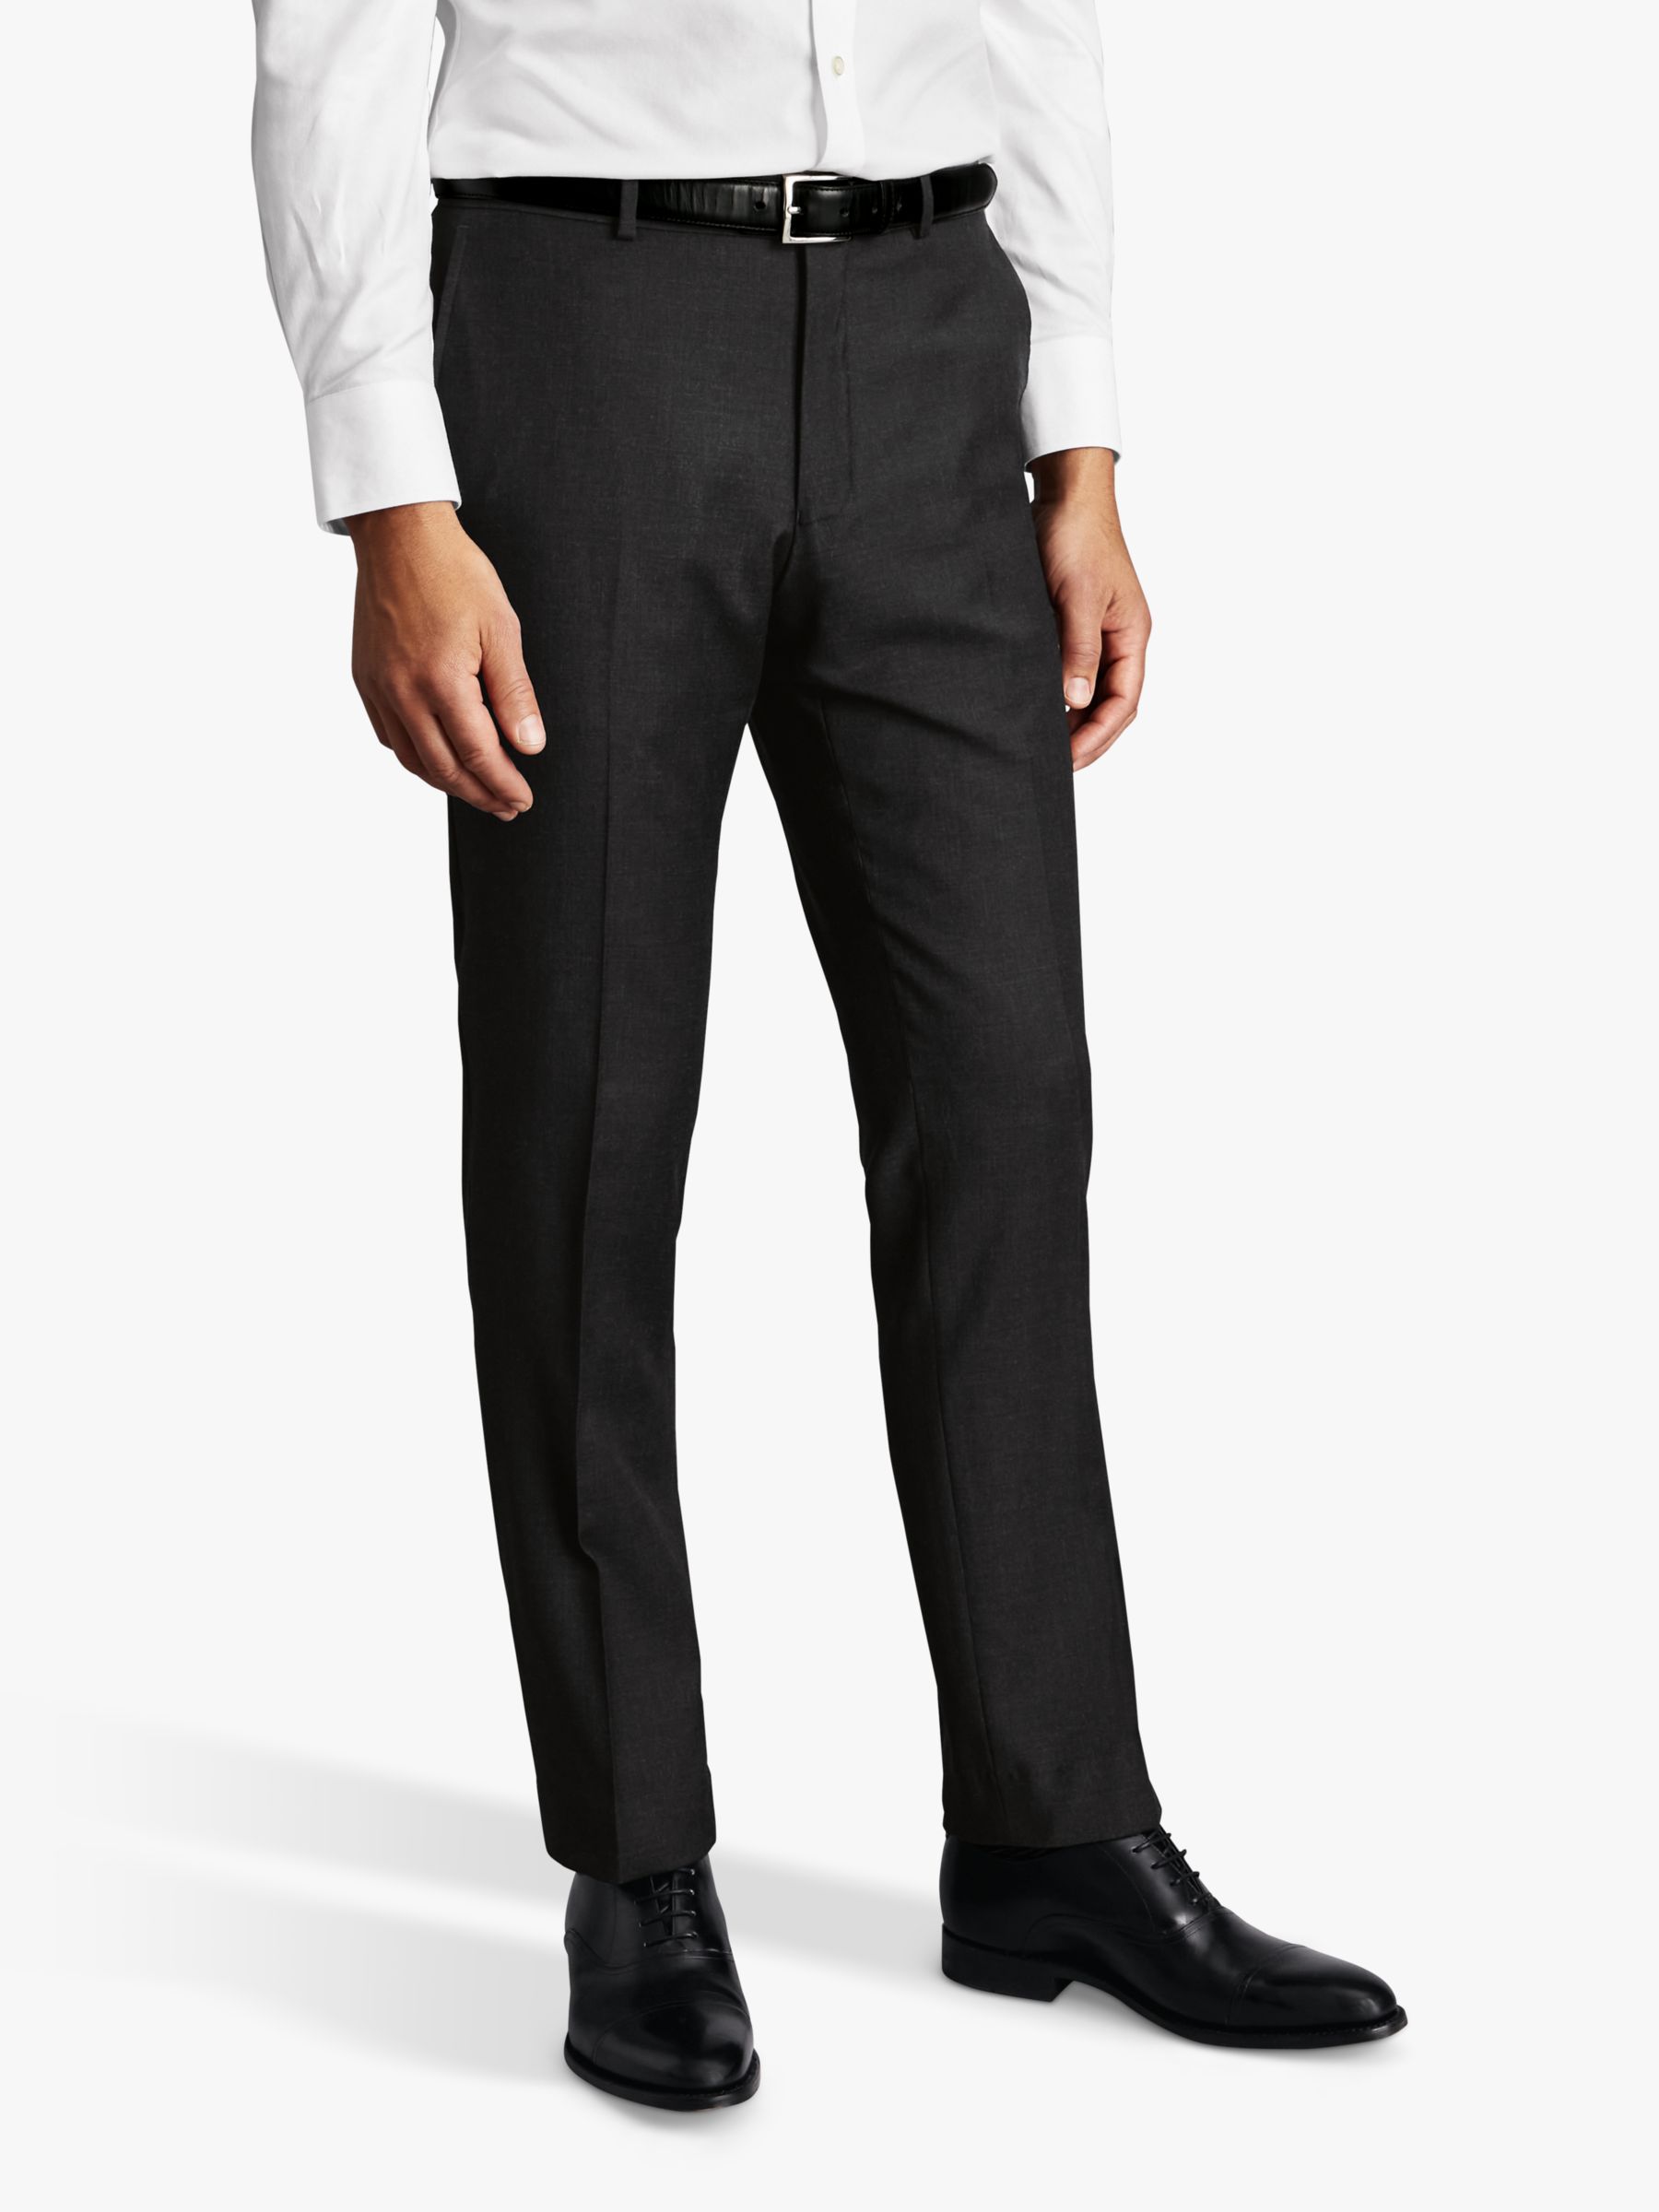 Charles Tyrwhitt Natural Stretch Twill Suit Trousers, Charcoal at John Lewis  & Partners